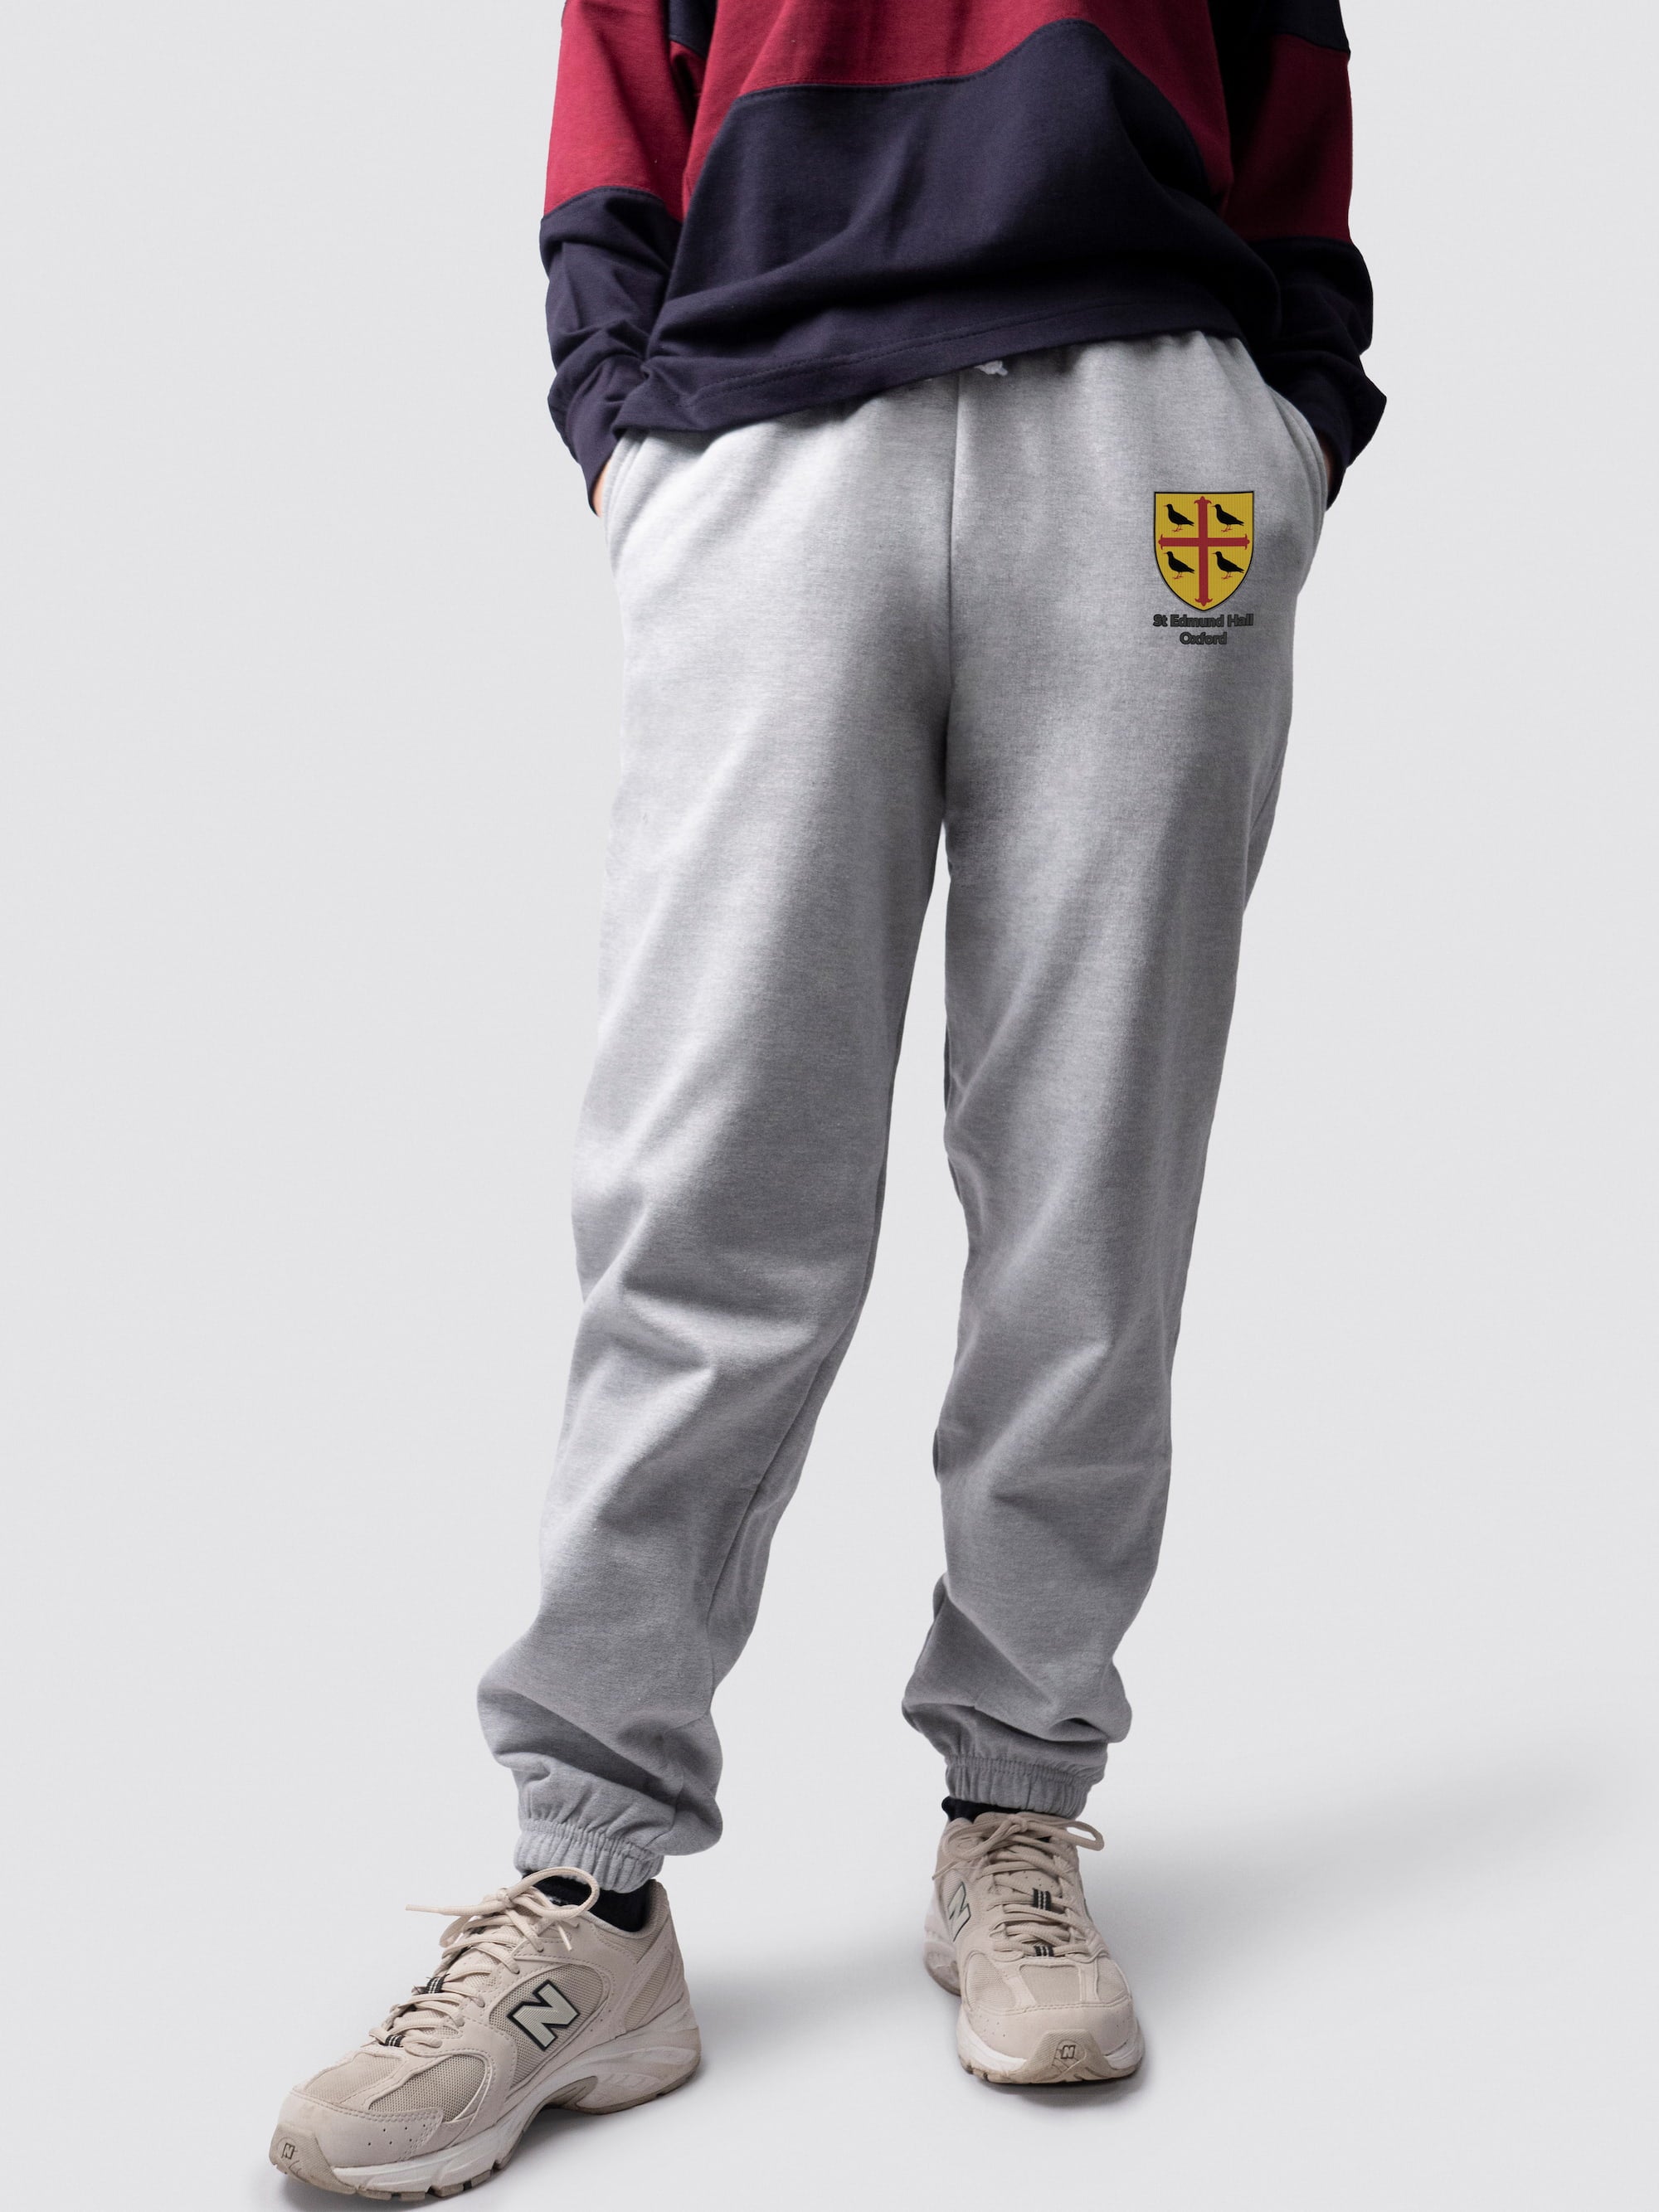 undergraduate cuffed sweatpants, made from soft cotton fabric, with St Edmund Hall logo